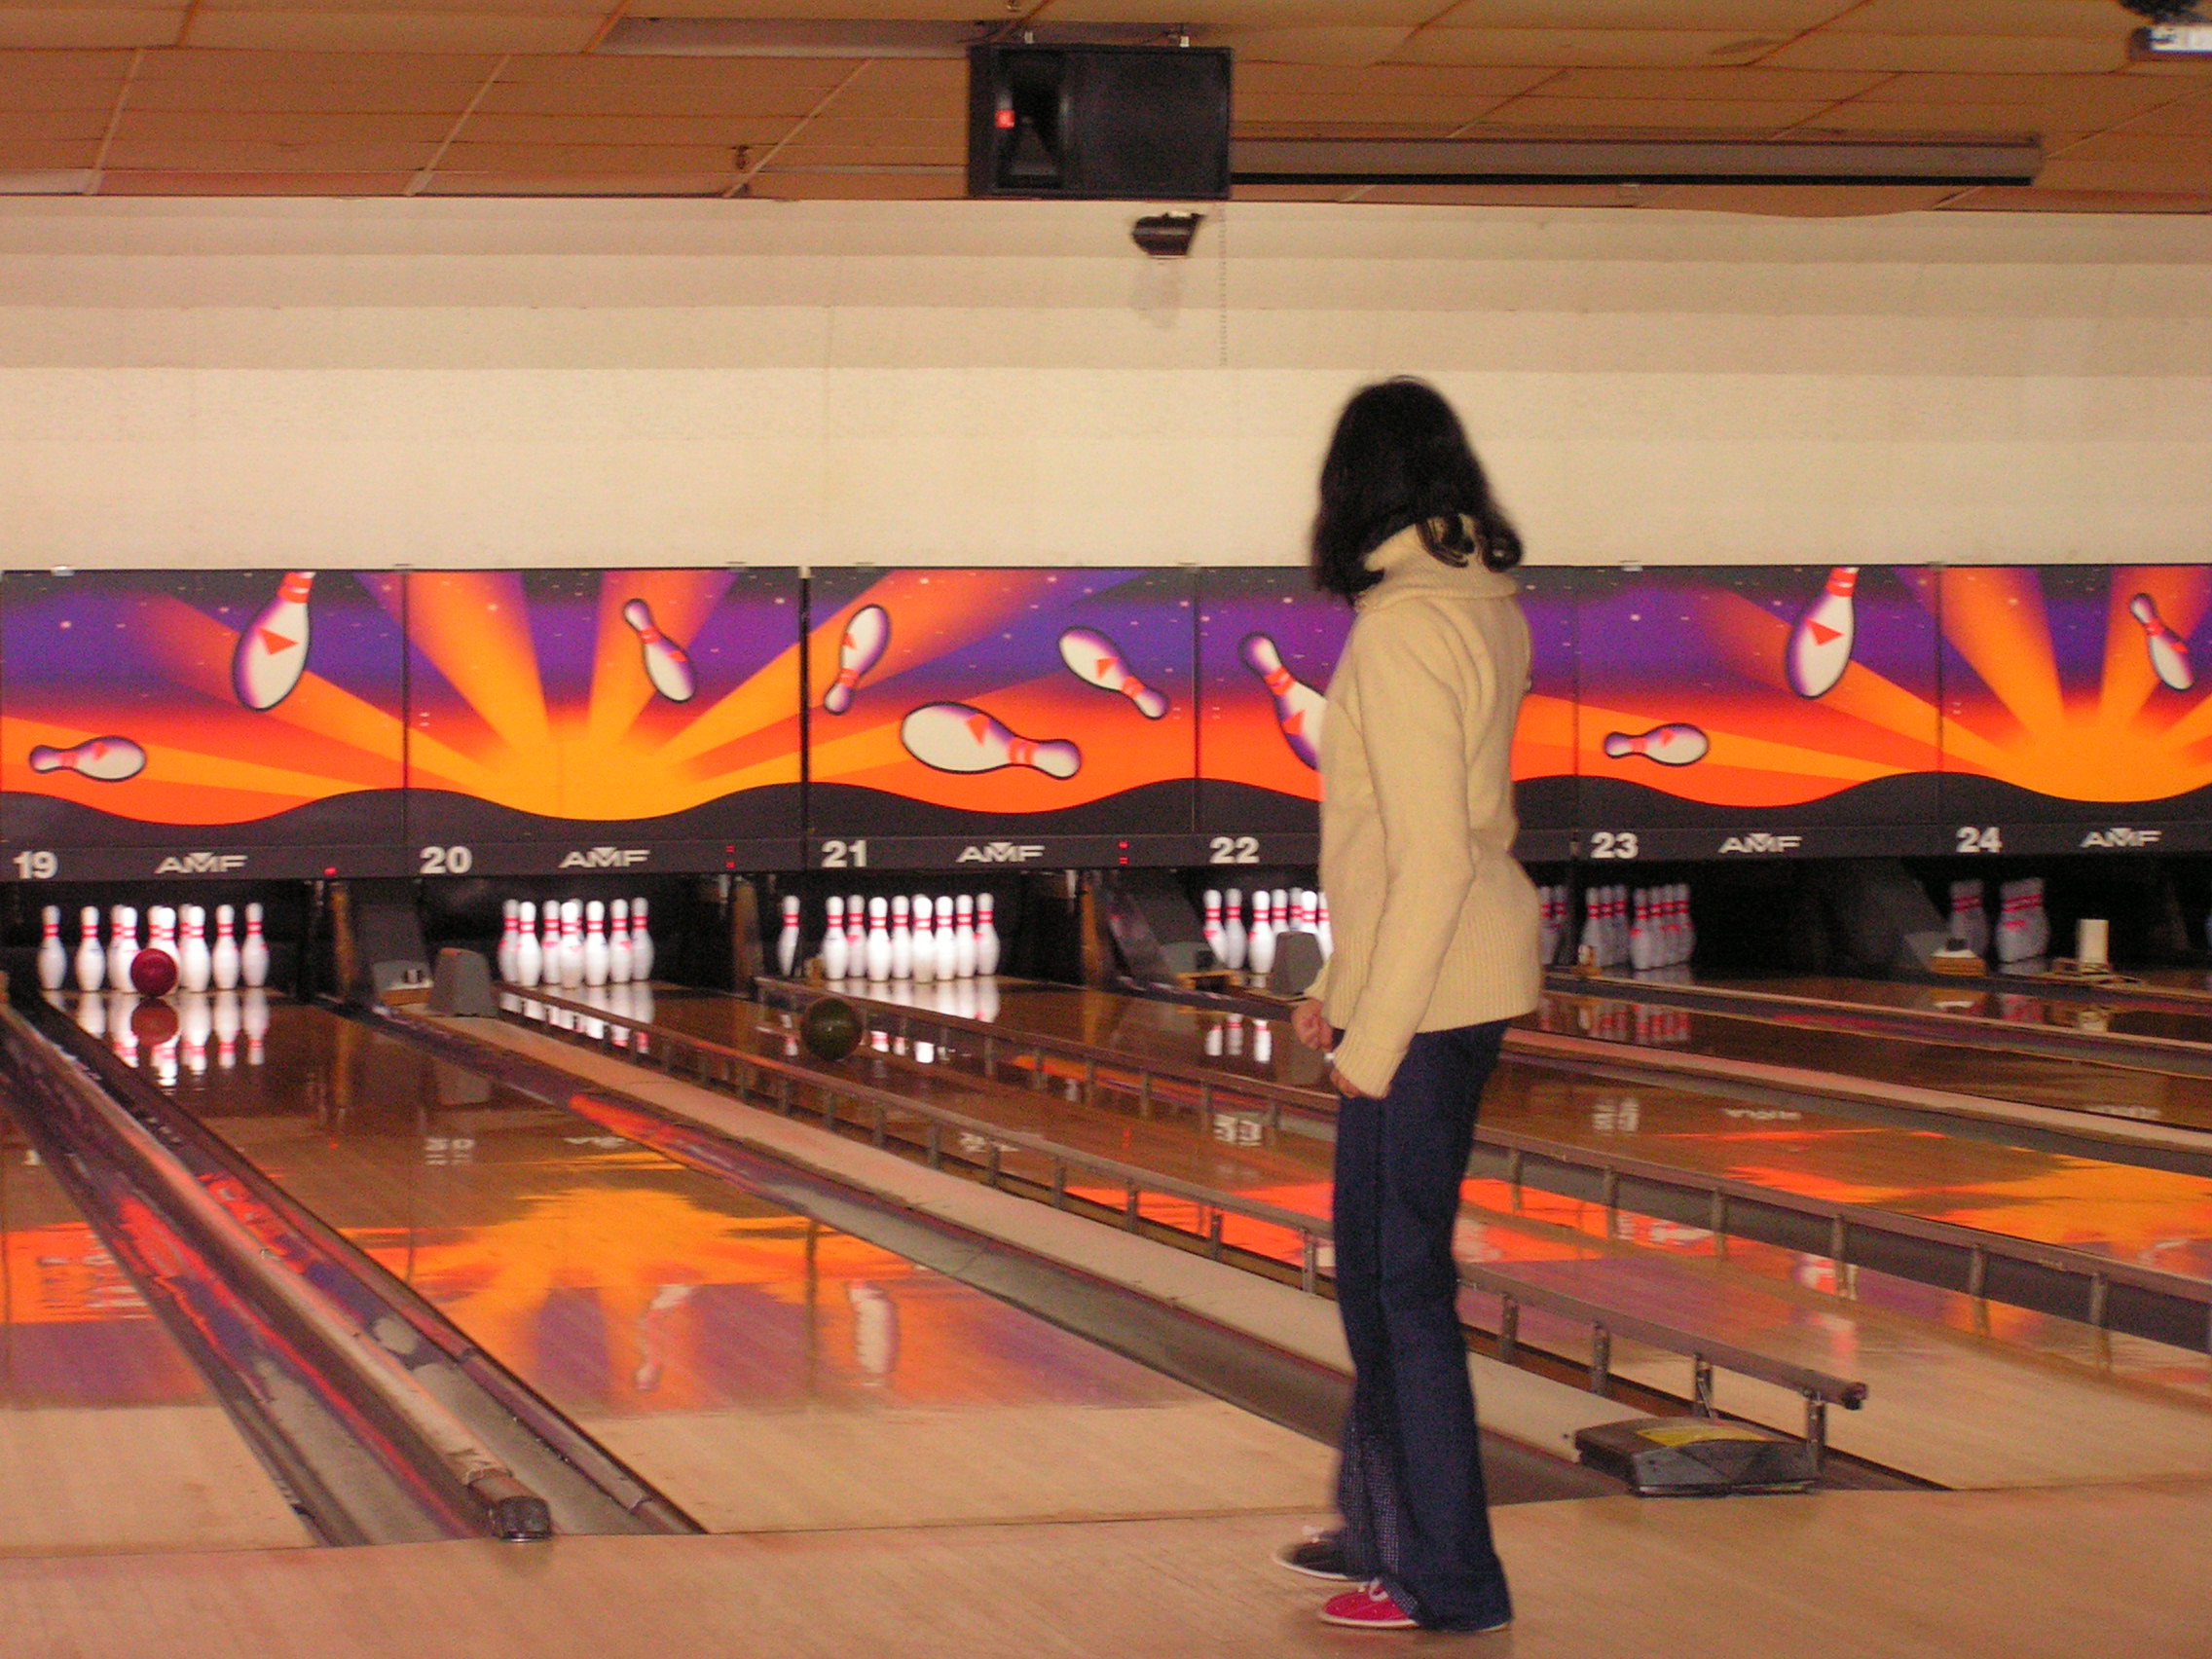 ./2006/Special Olympics Bowling/SOBowlingPractice4.jpg